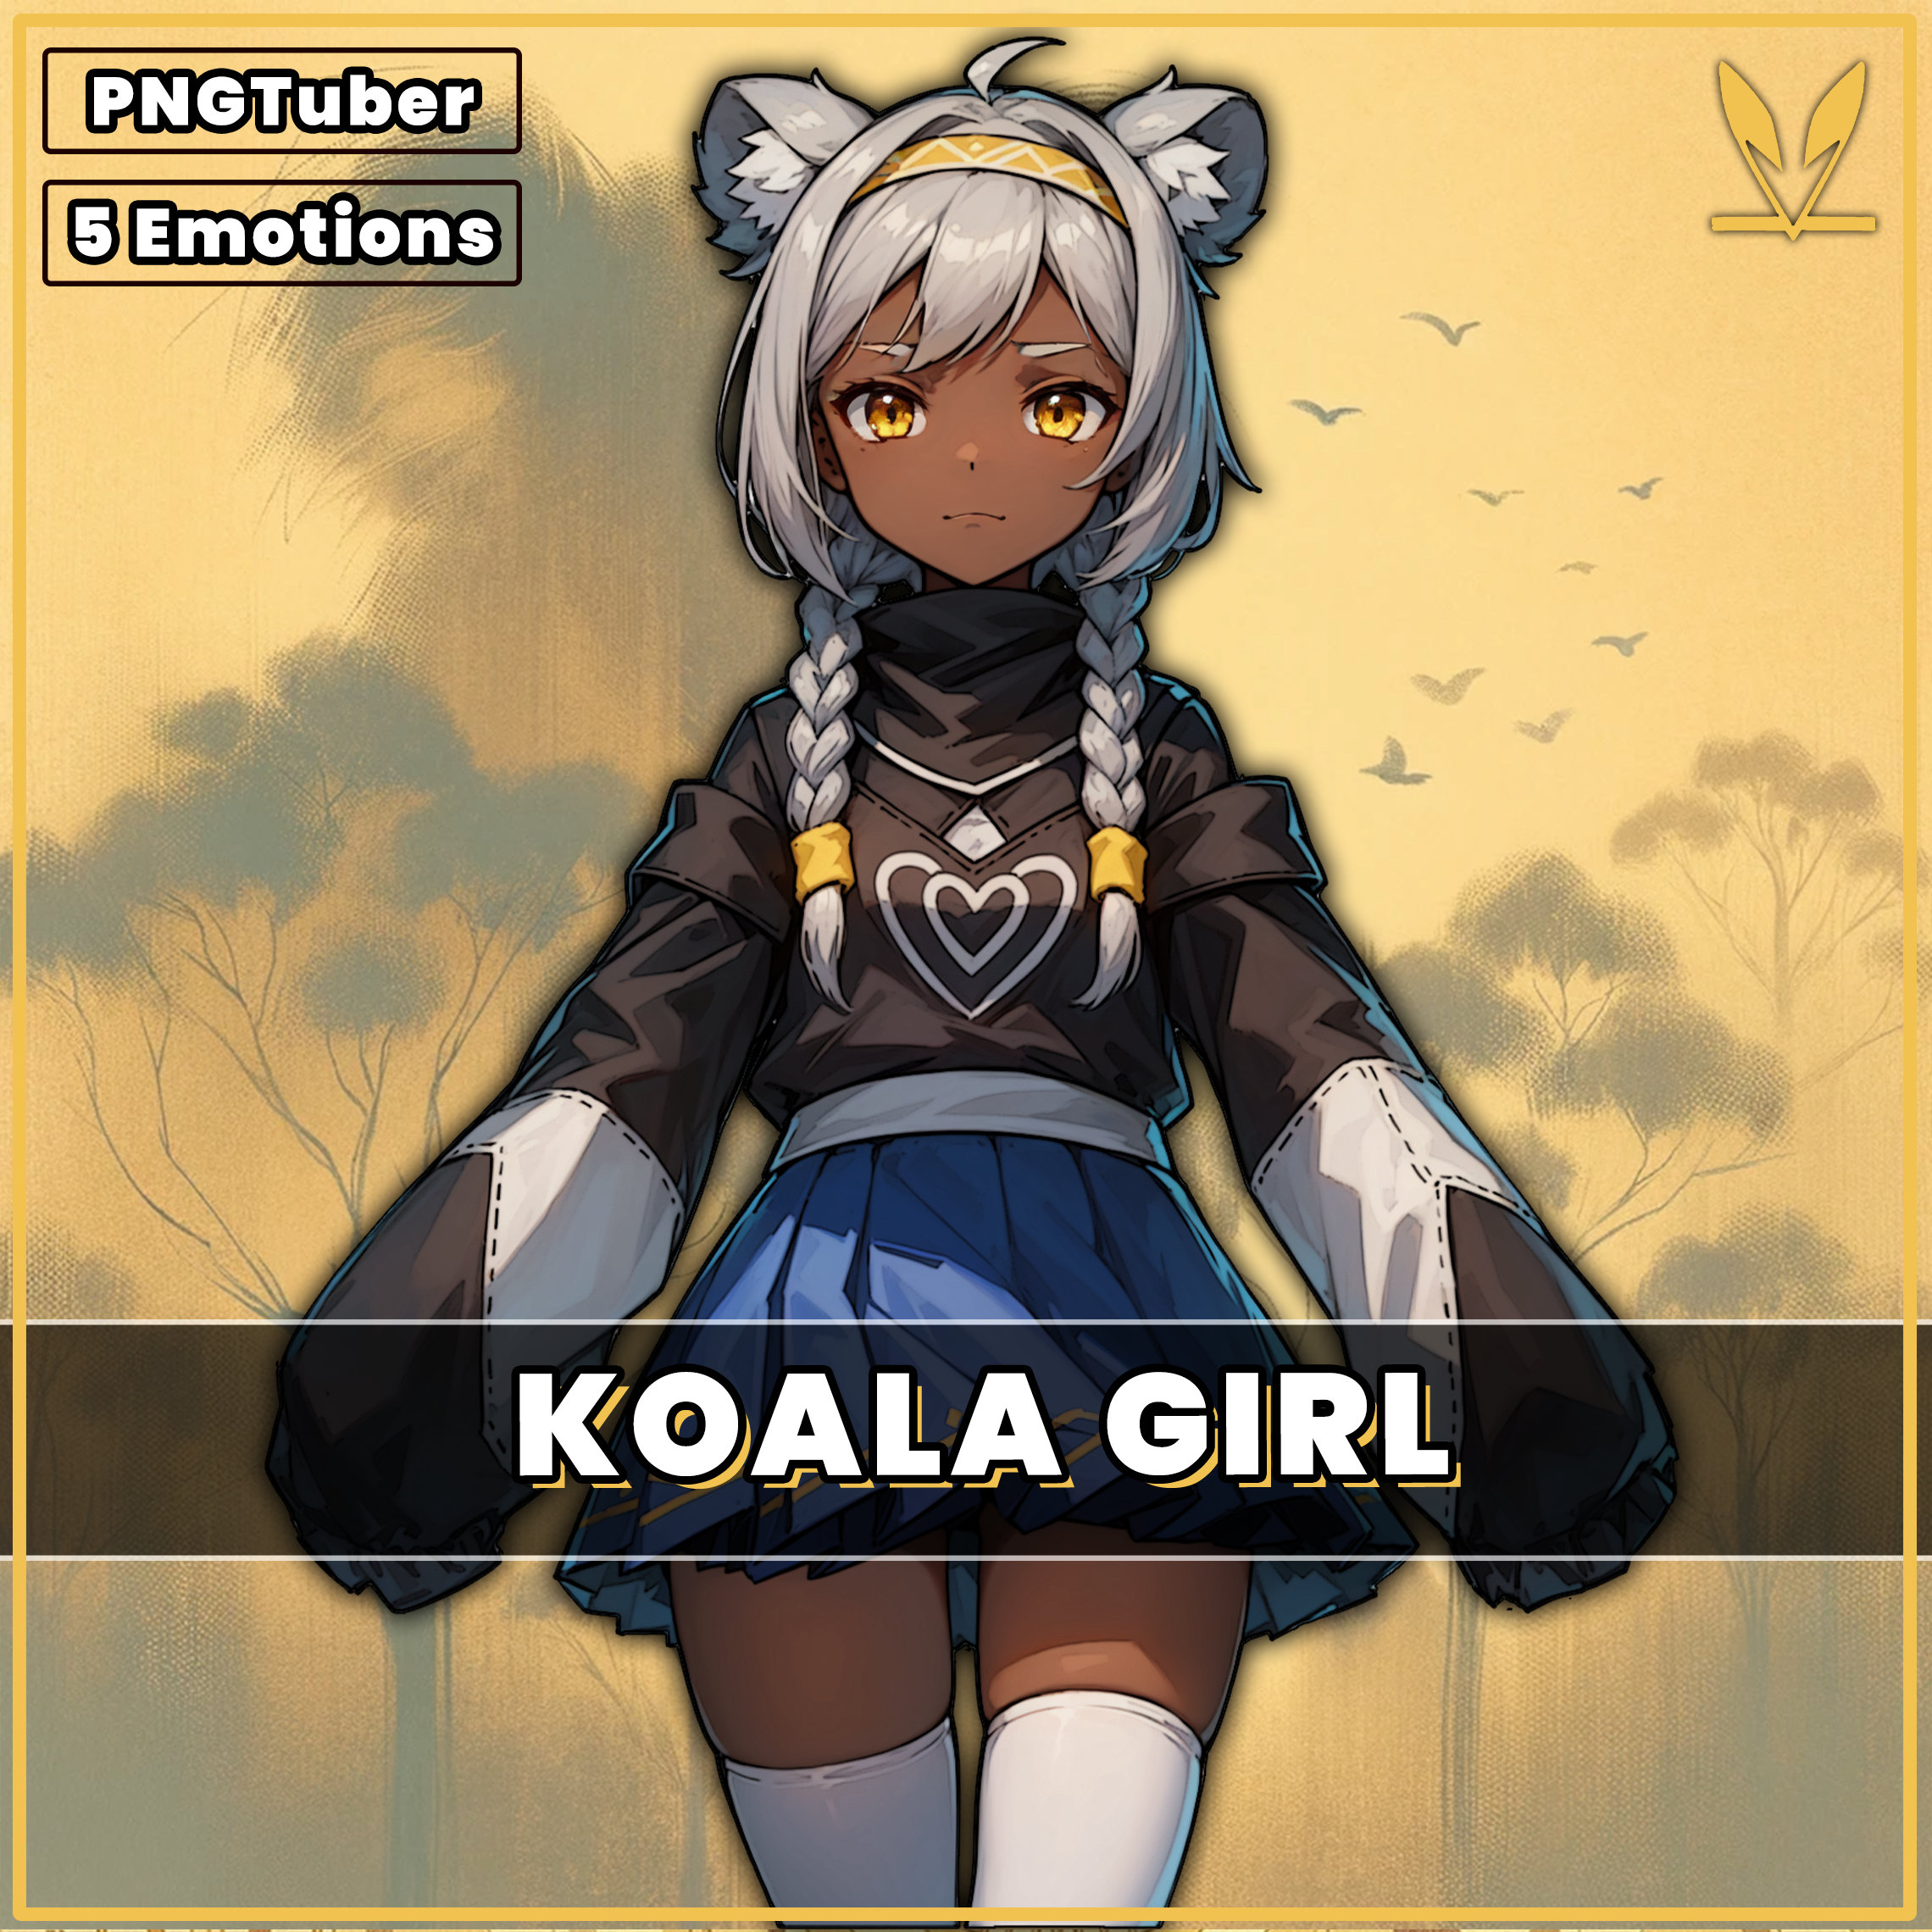 Pngtuber Koala Girl With 5 Expressions Ready to Go. Good for